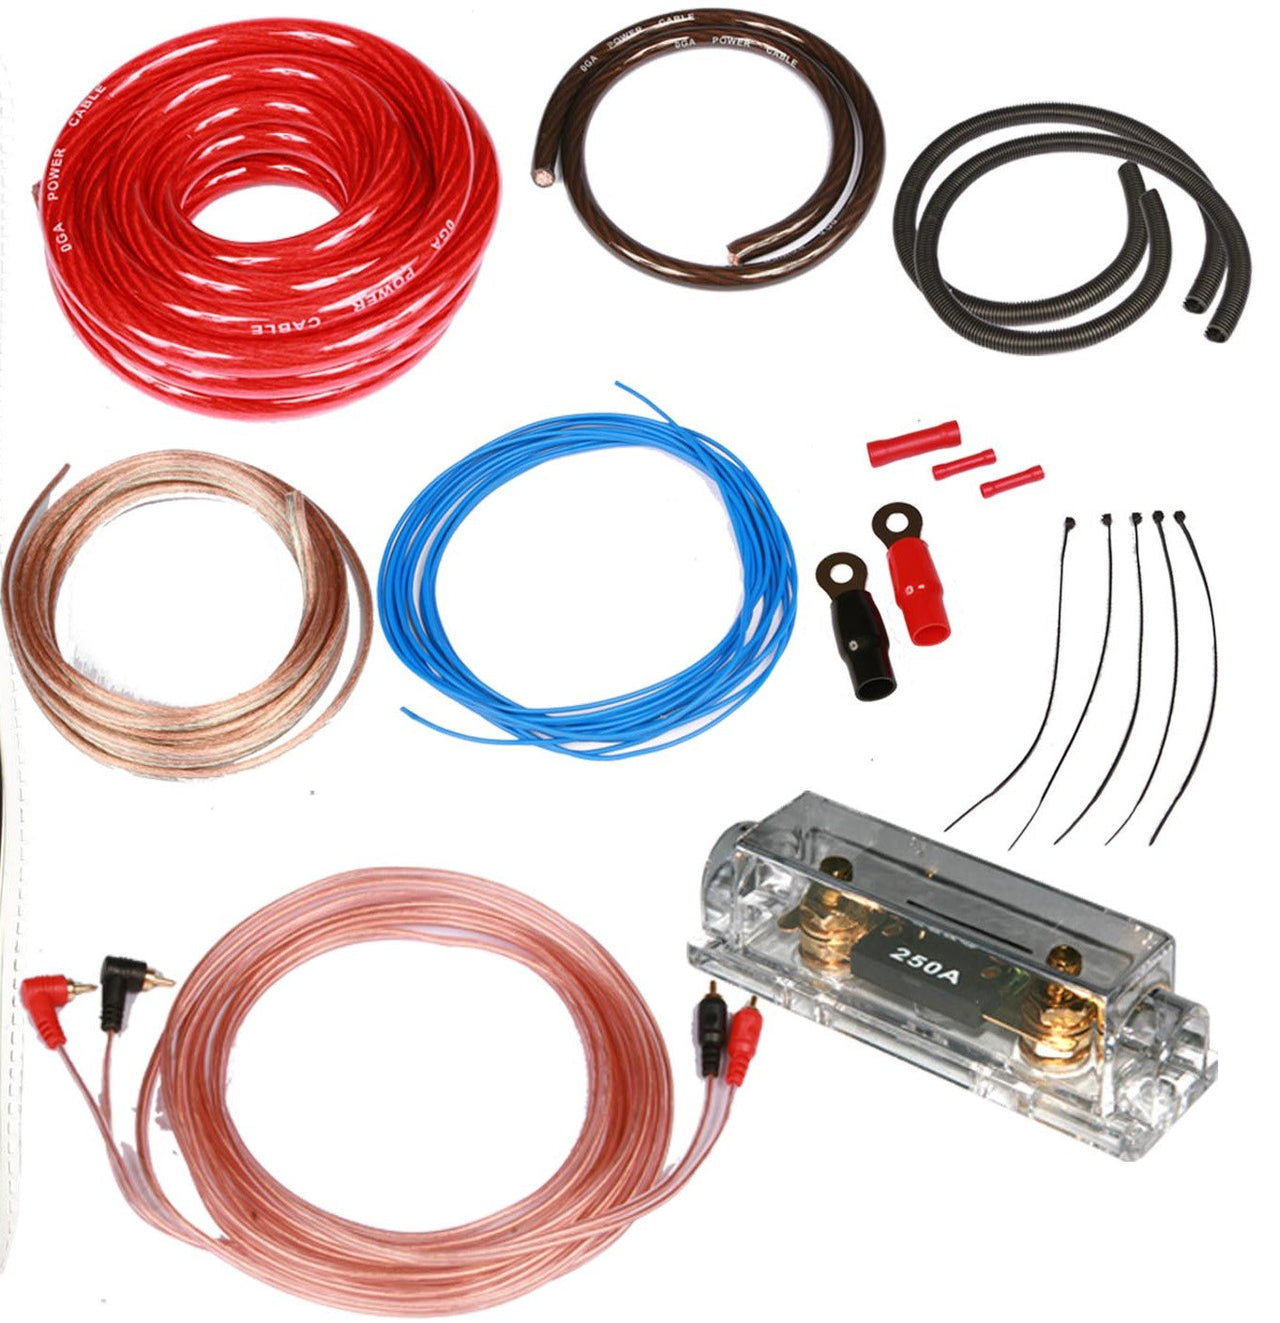 2 Absolute Kit 0 Complete 0 Gauge Amplifier Kit with RCA Interconnect Cable